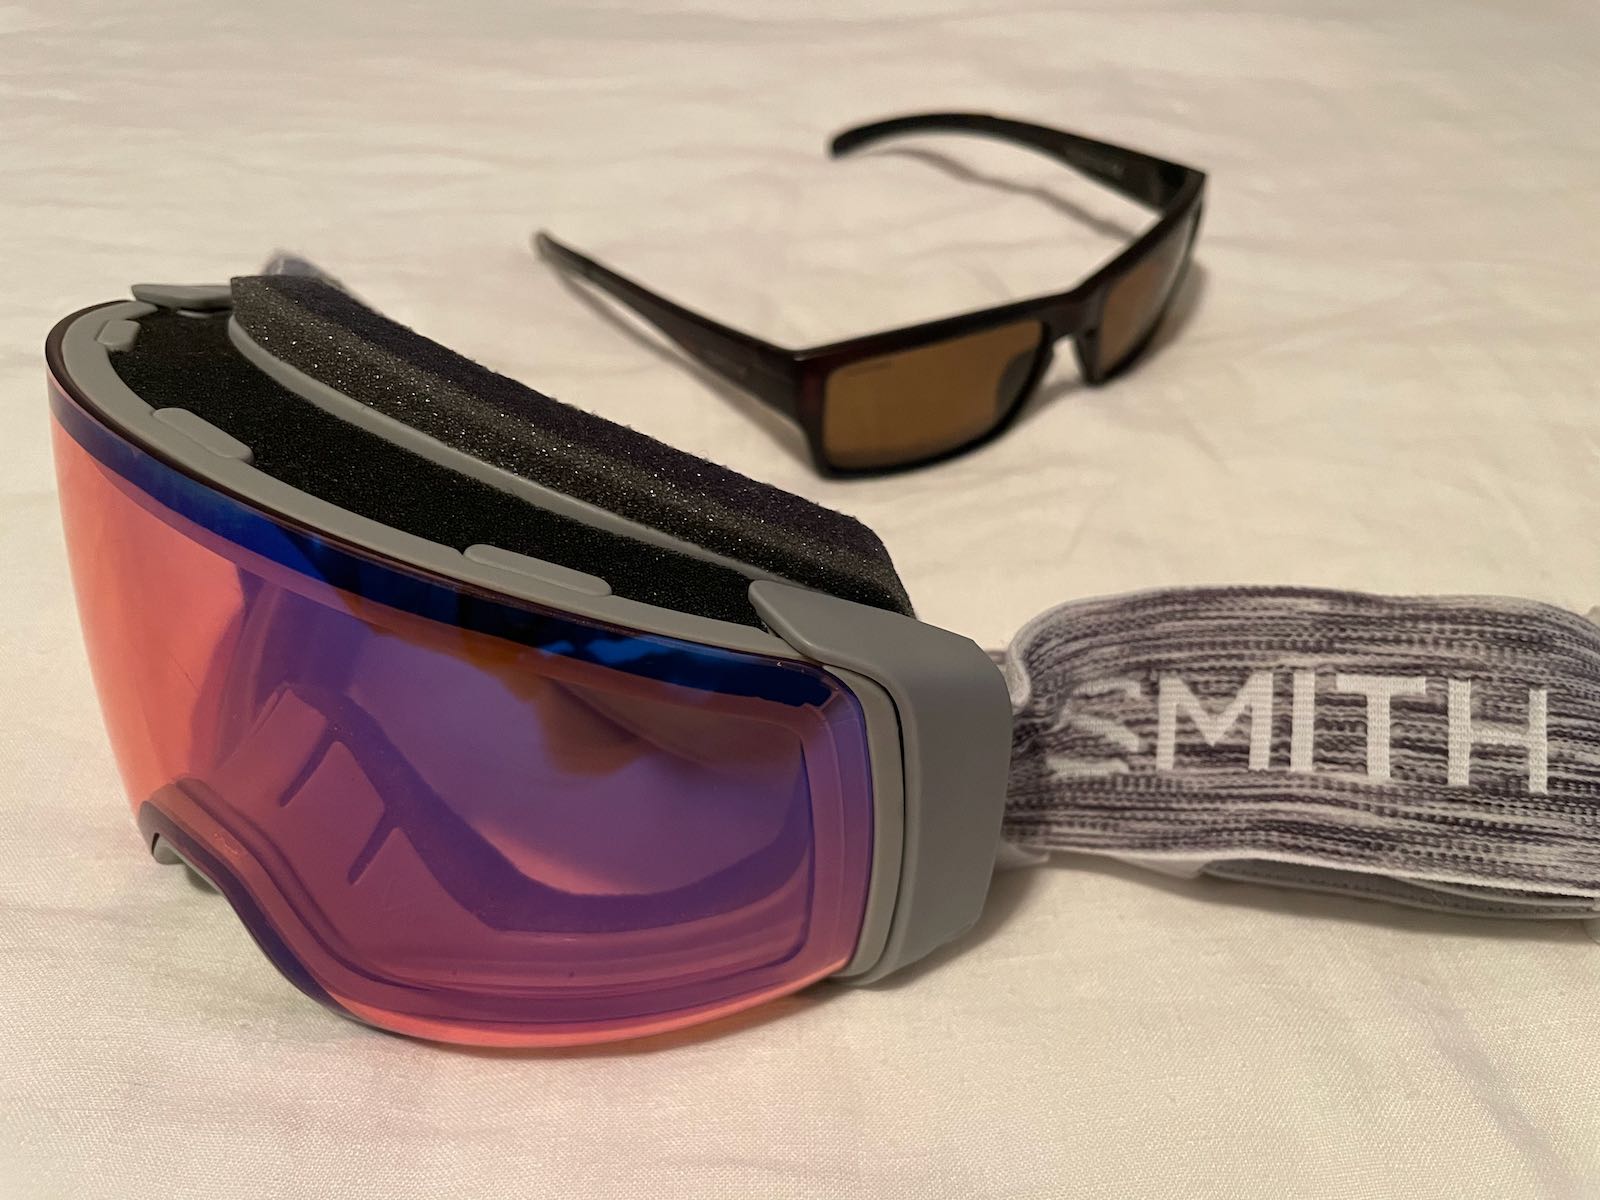 The Smith ski goggles, beside my “all-weather” Smith sunglasses.